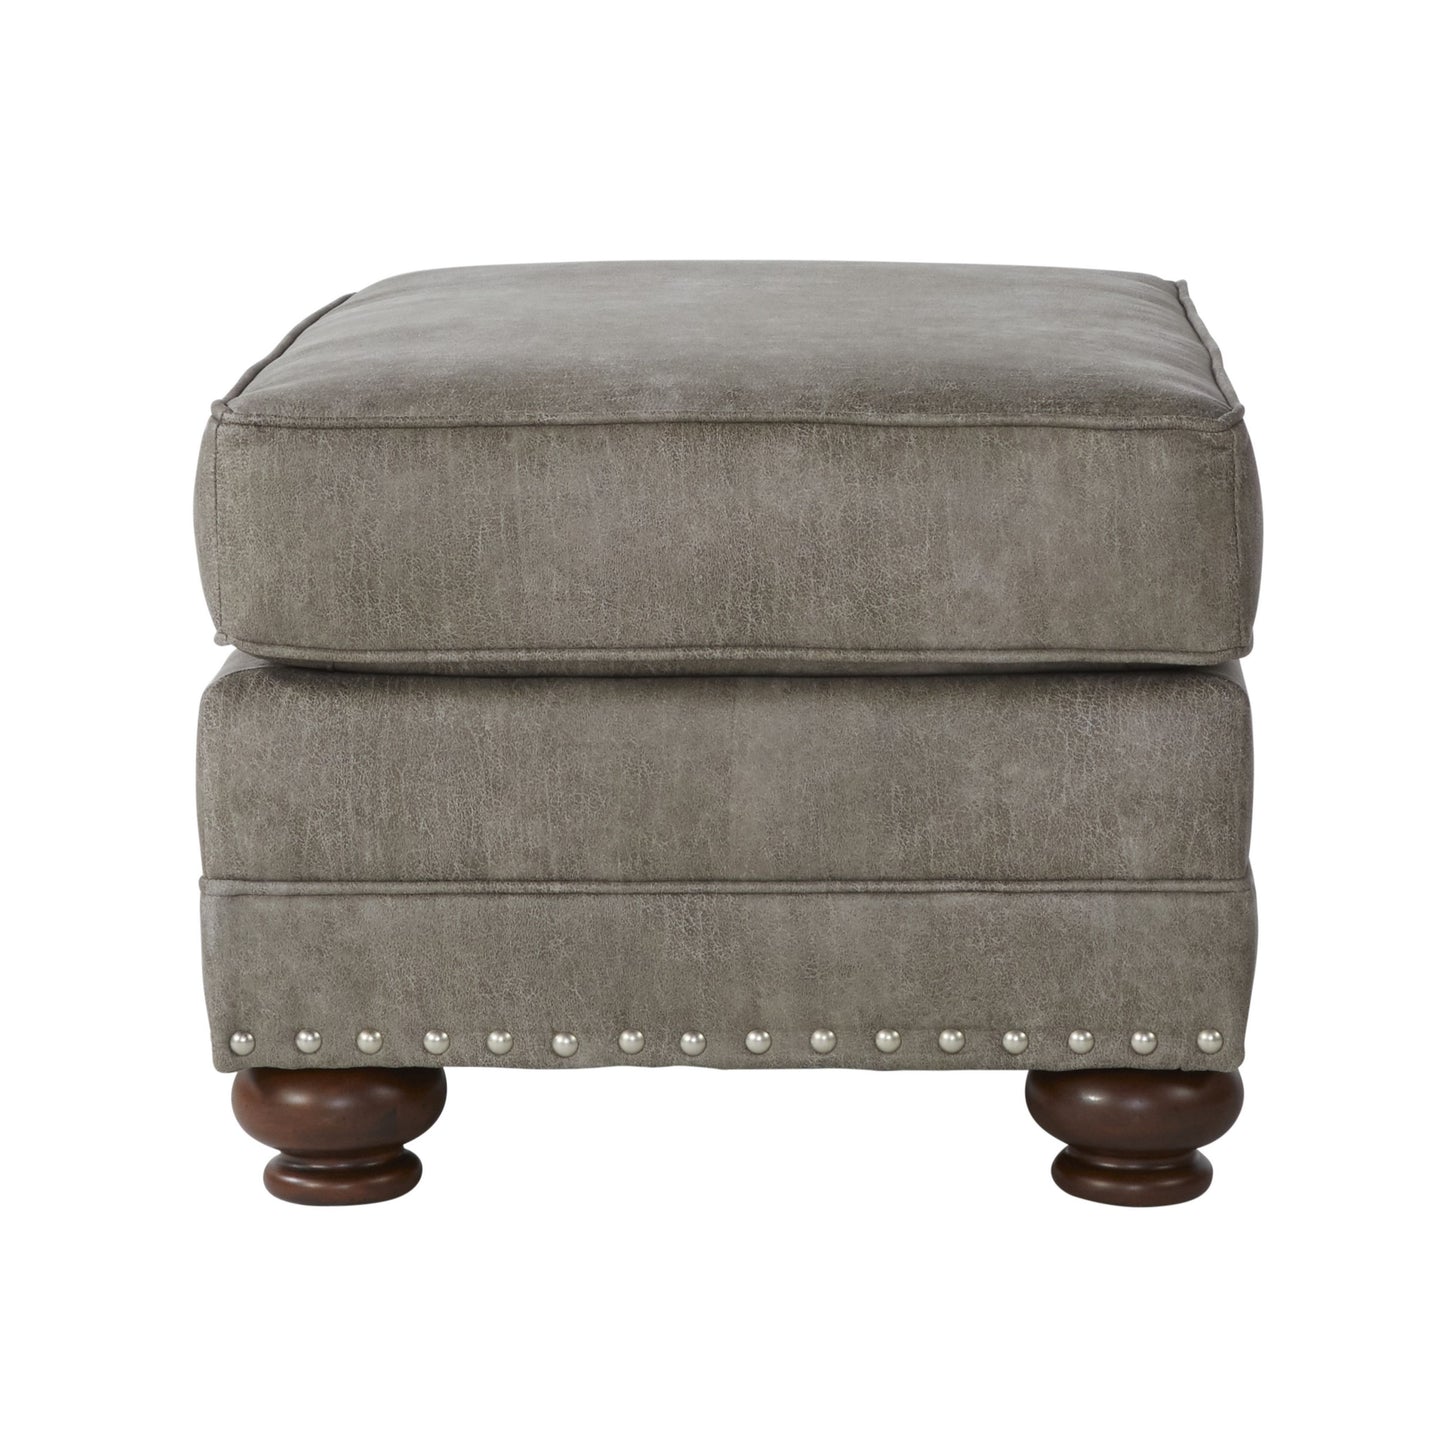 Leinster Faux Leather Upholstered Nailhead Ottoman in Stone Gray